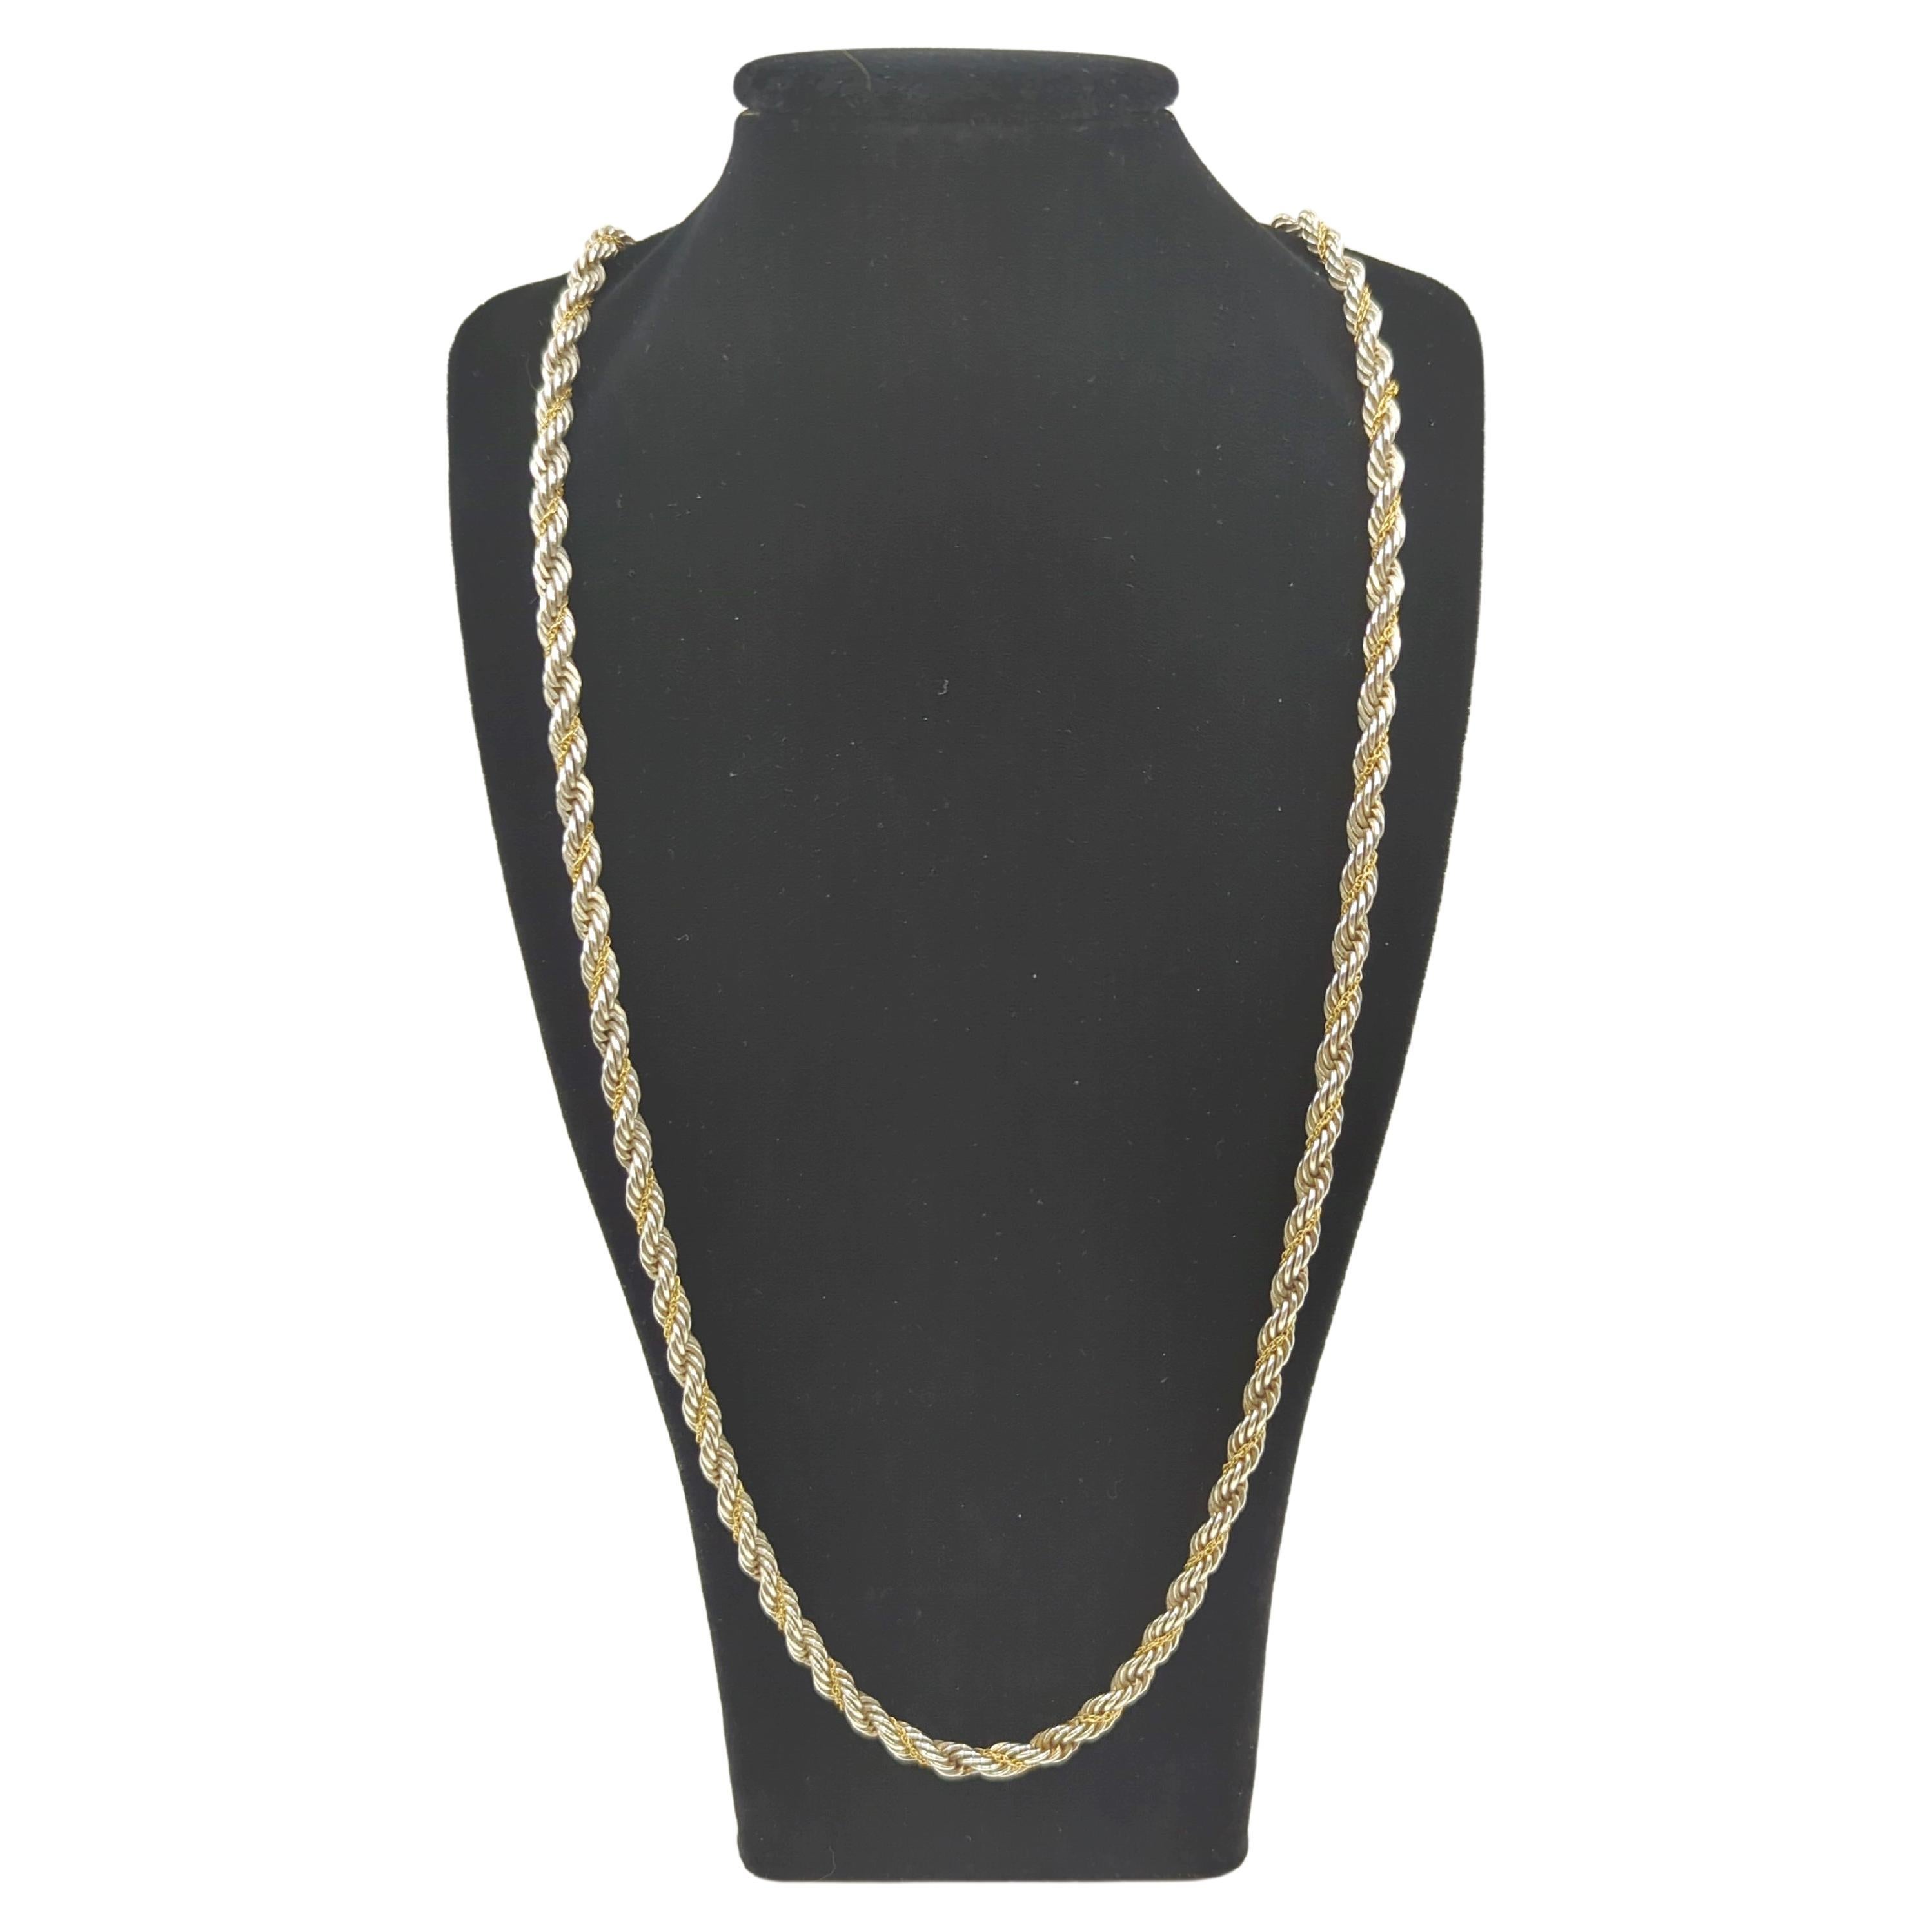 This elegant 5.0mm thick Tiffany&Co. rope chain necklace makes a bold statement, at 30